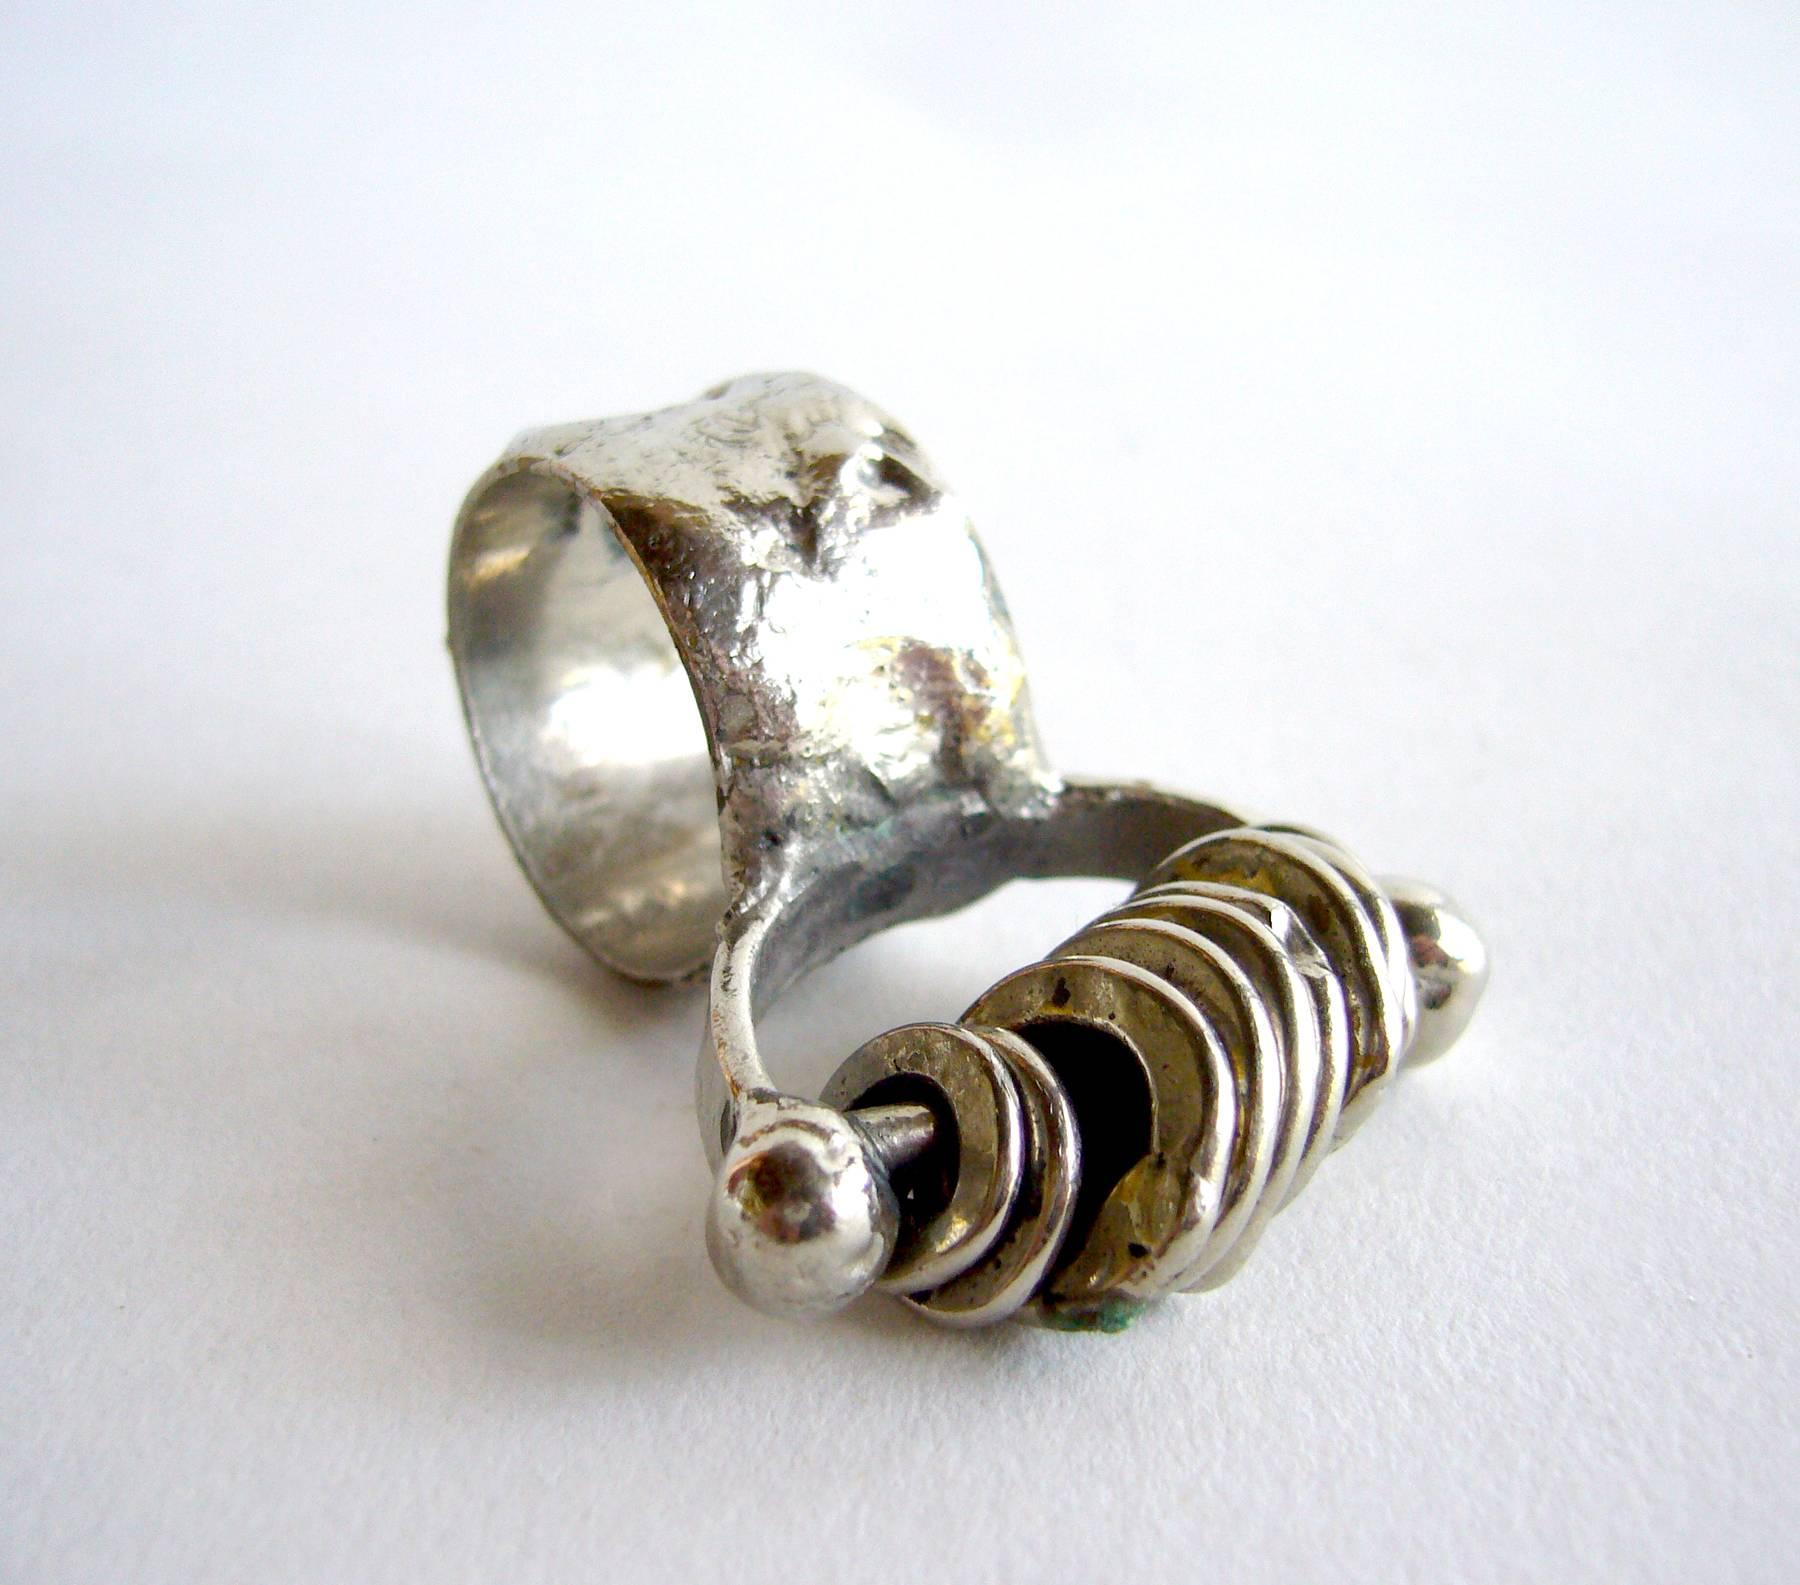 Silver plate ring created by Pal Kepenyes of Acapulco, Mexico.  Ring is a finger size 7 and is signed Pal Kepenyes, Mexico.  In very good vintage condition.